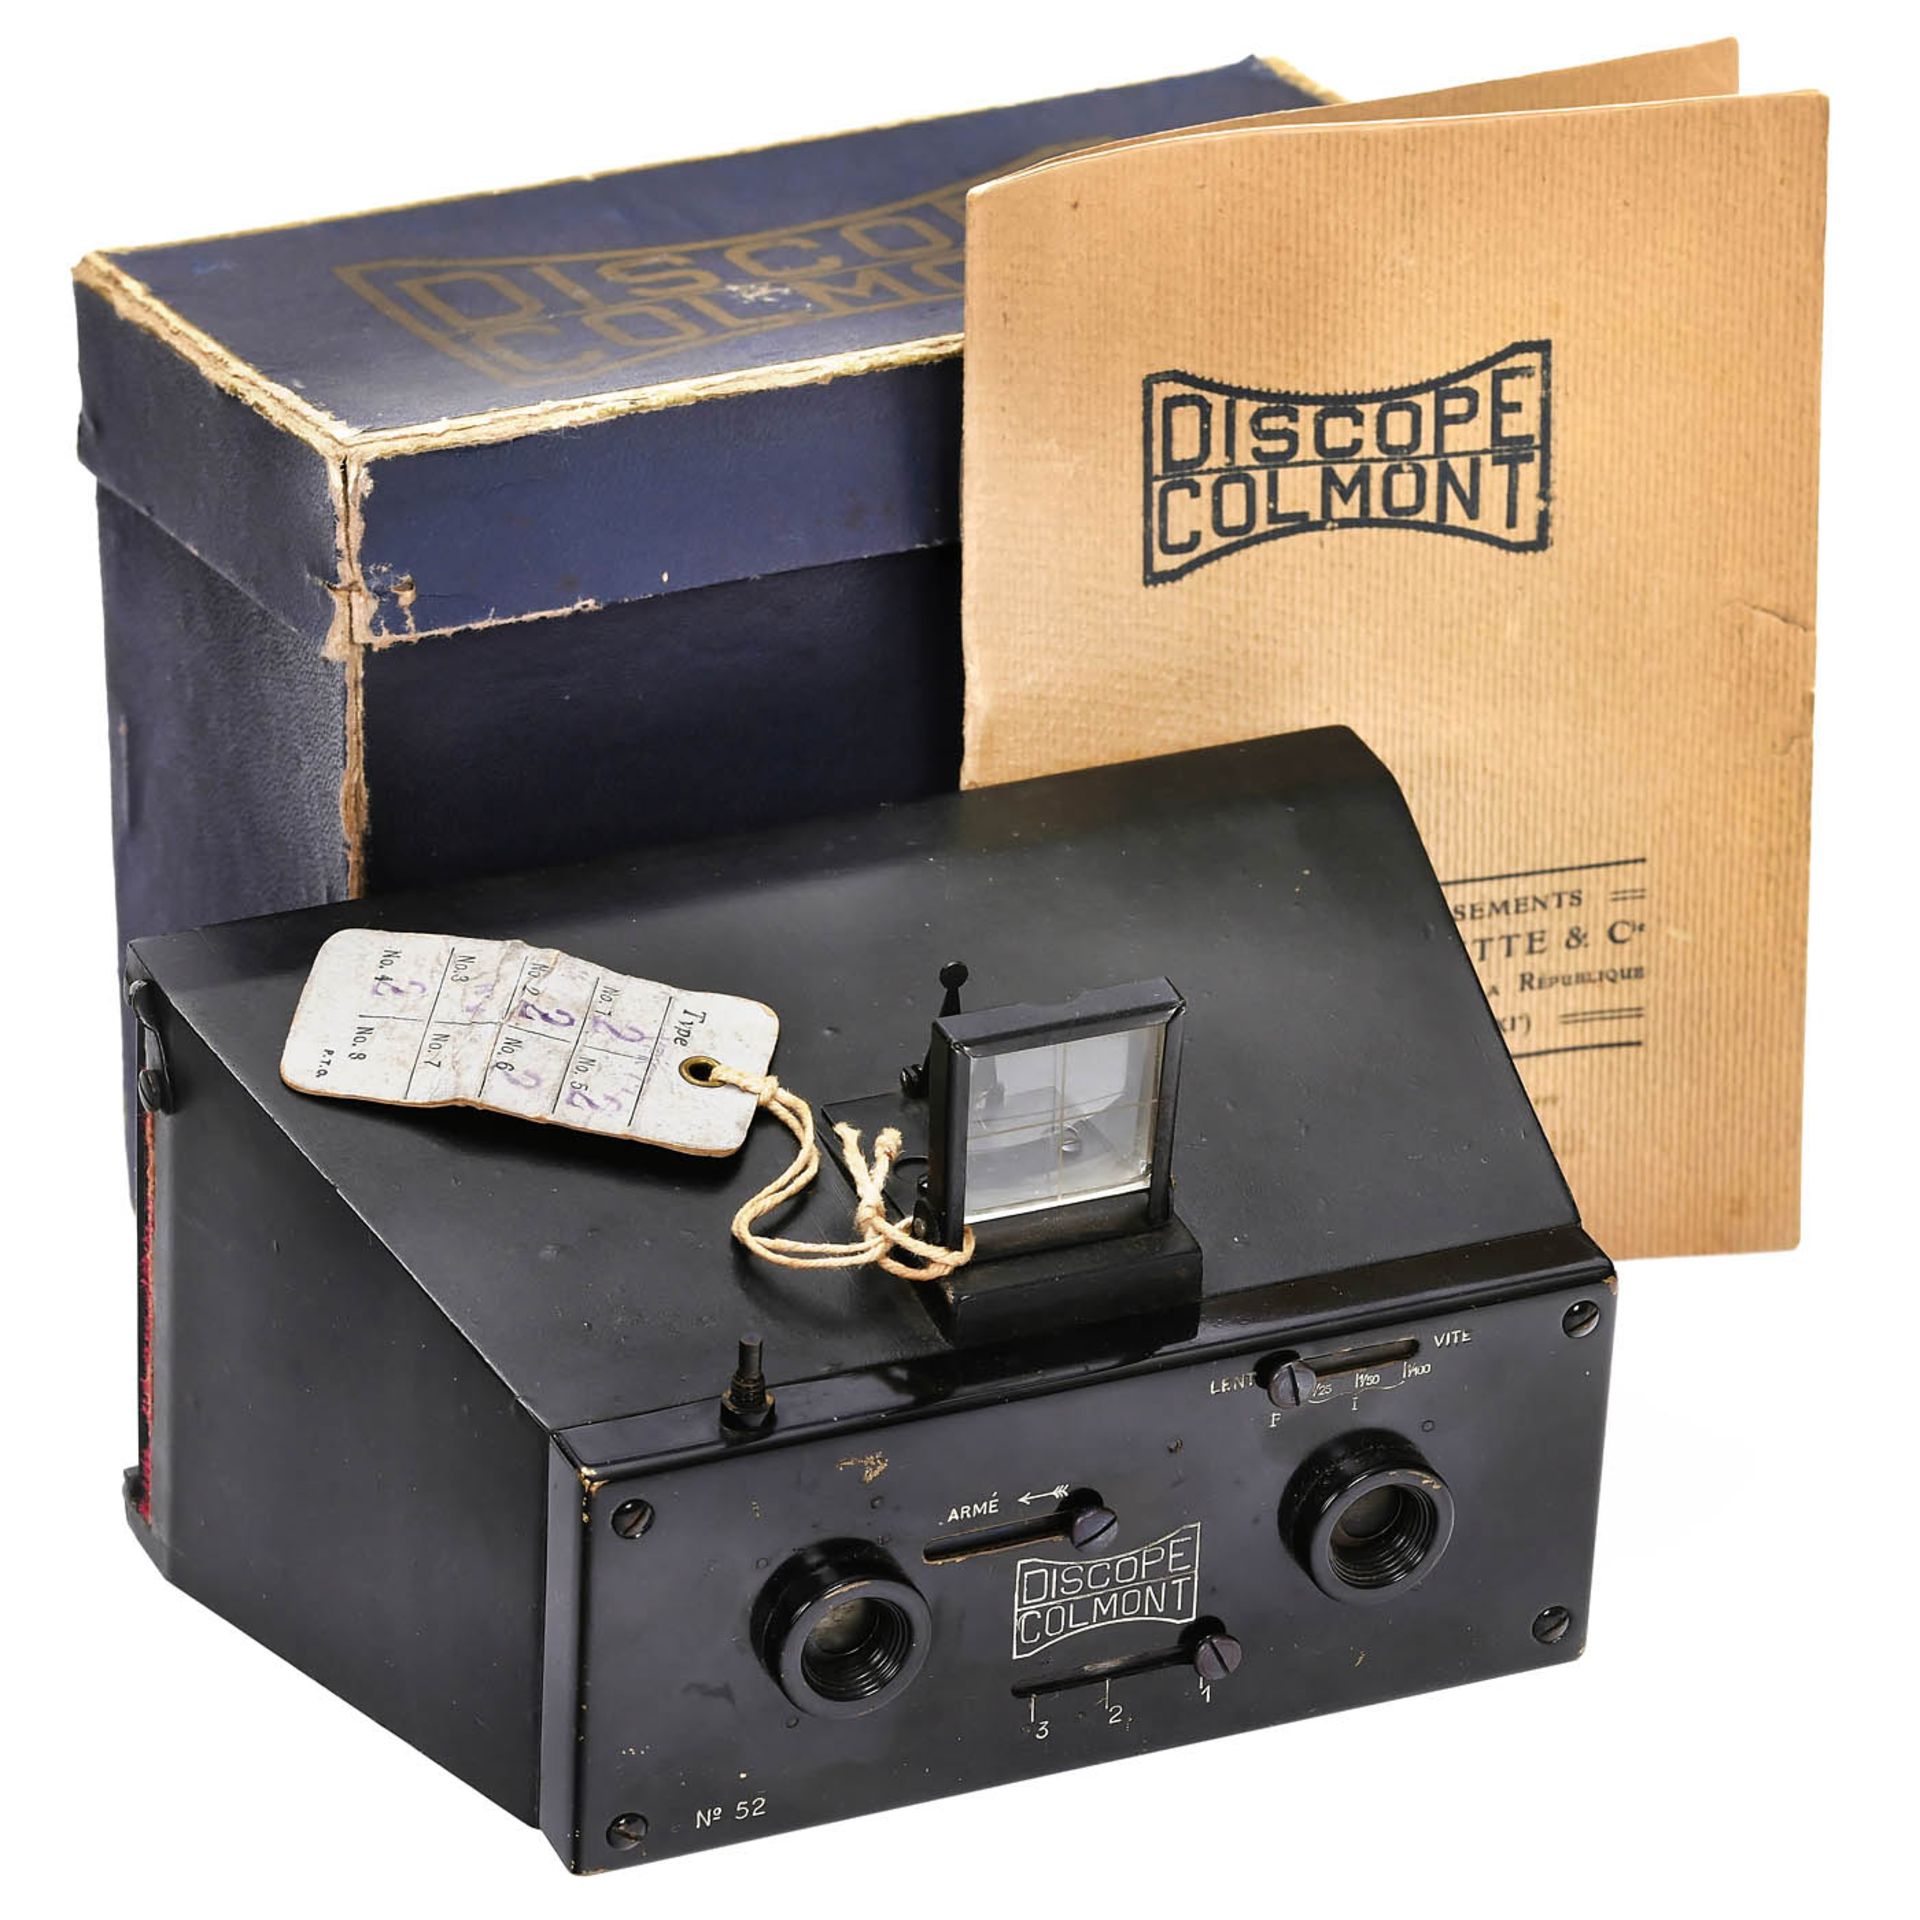 Discope Colmont Stereo-Jumelle Camera, c. 1925